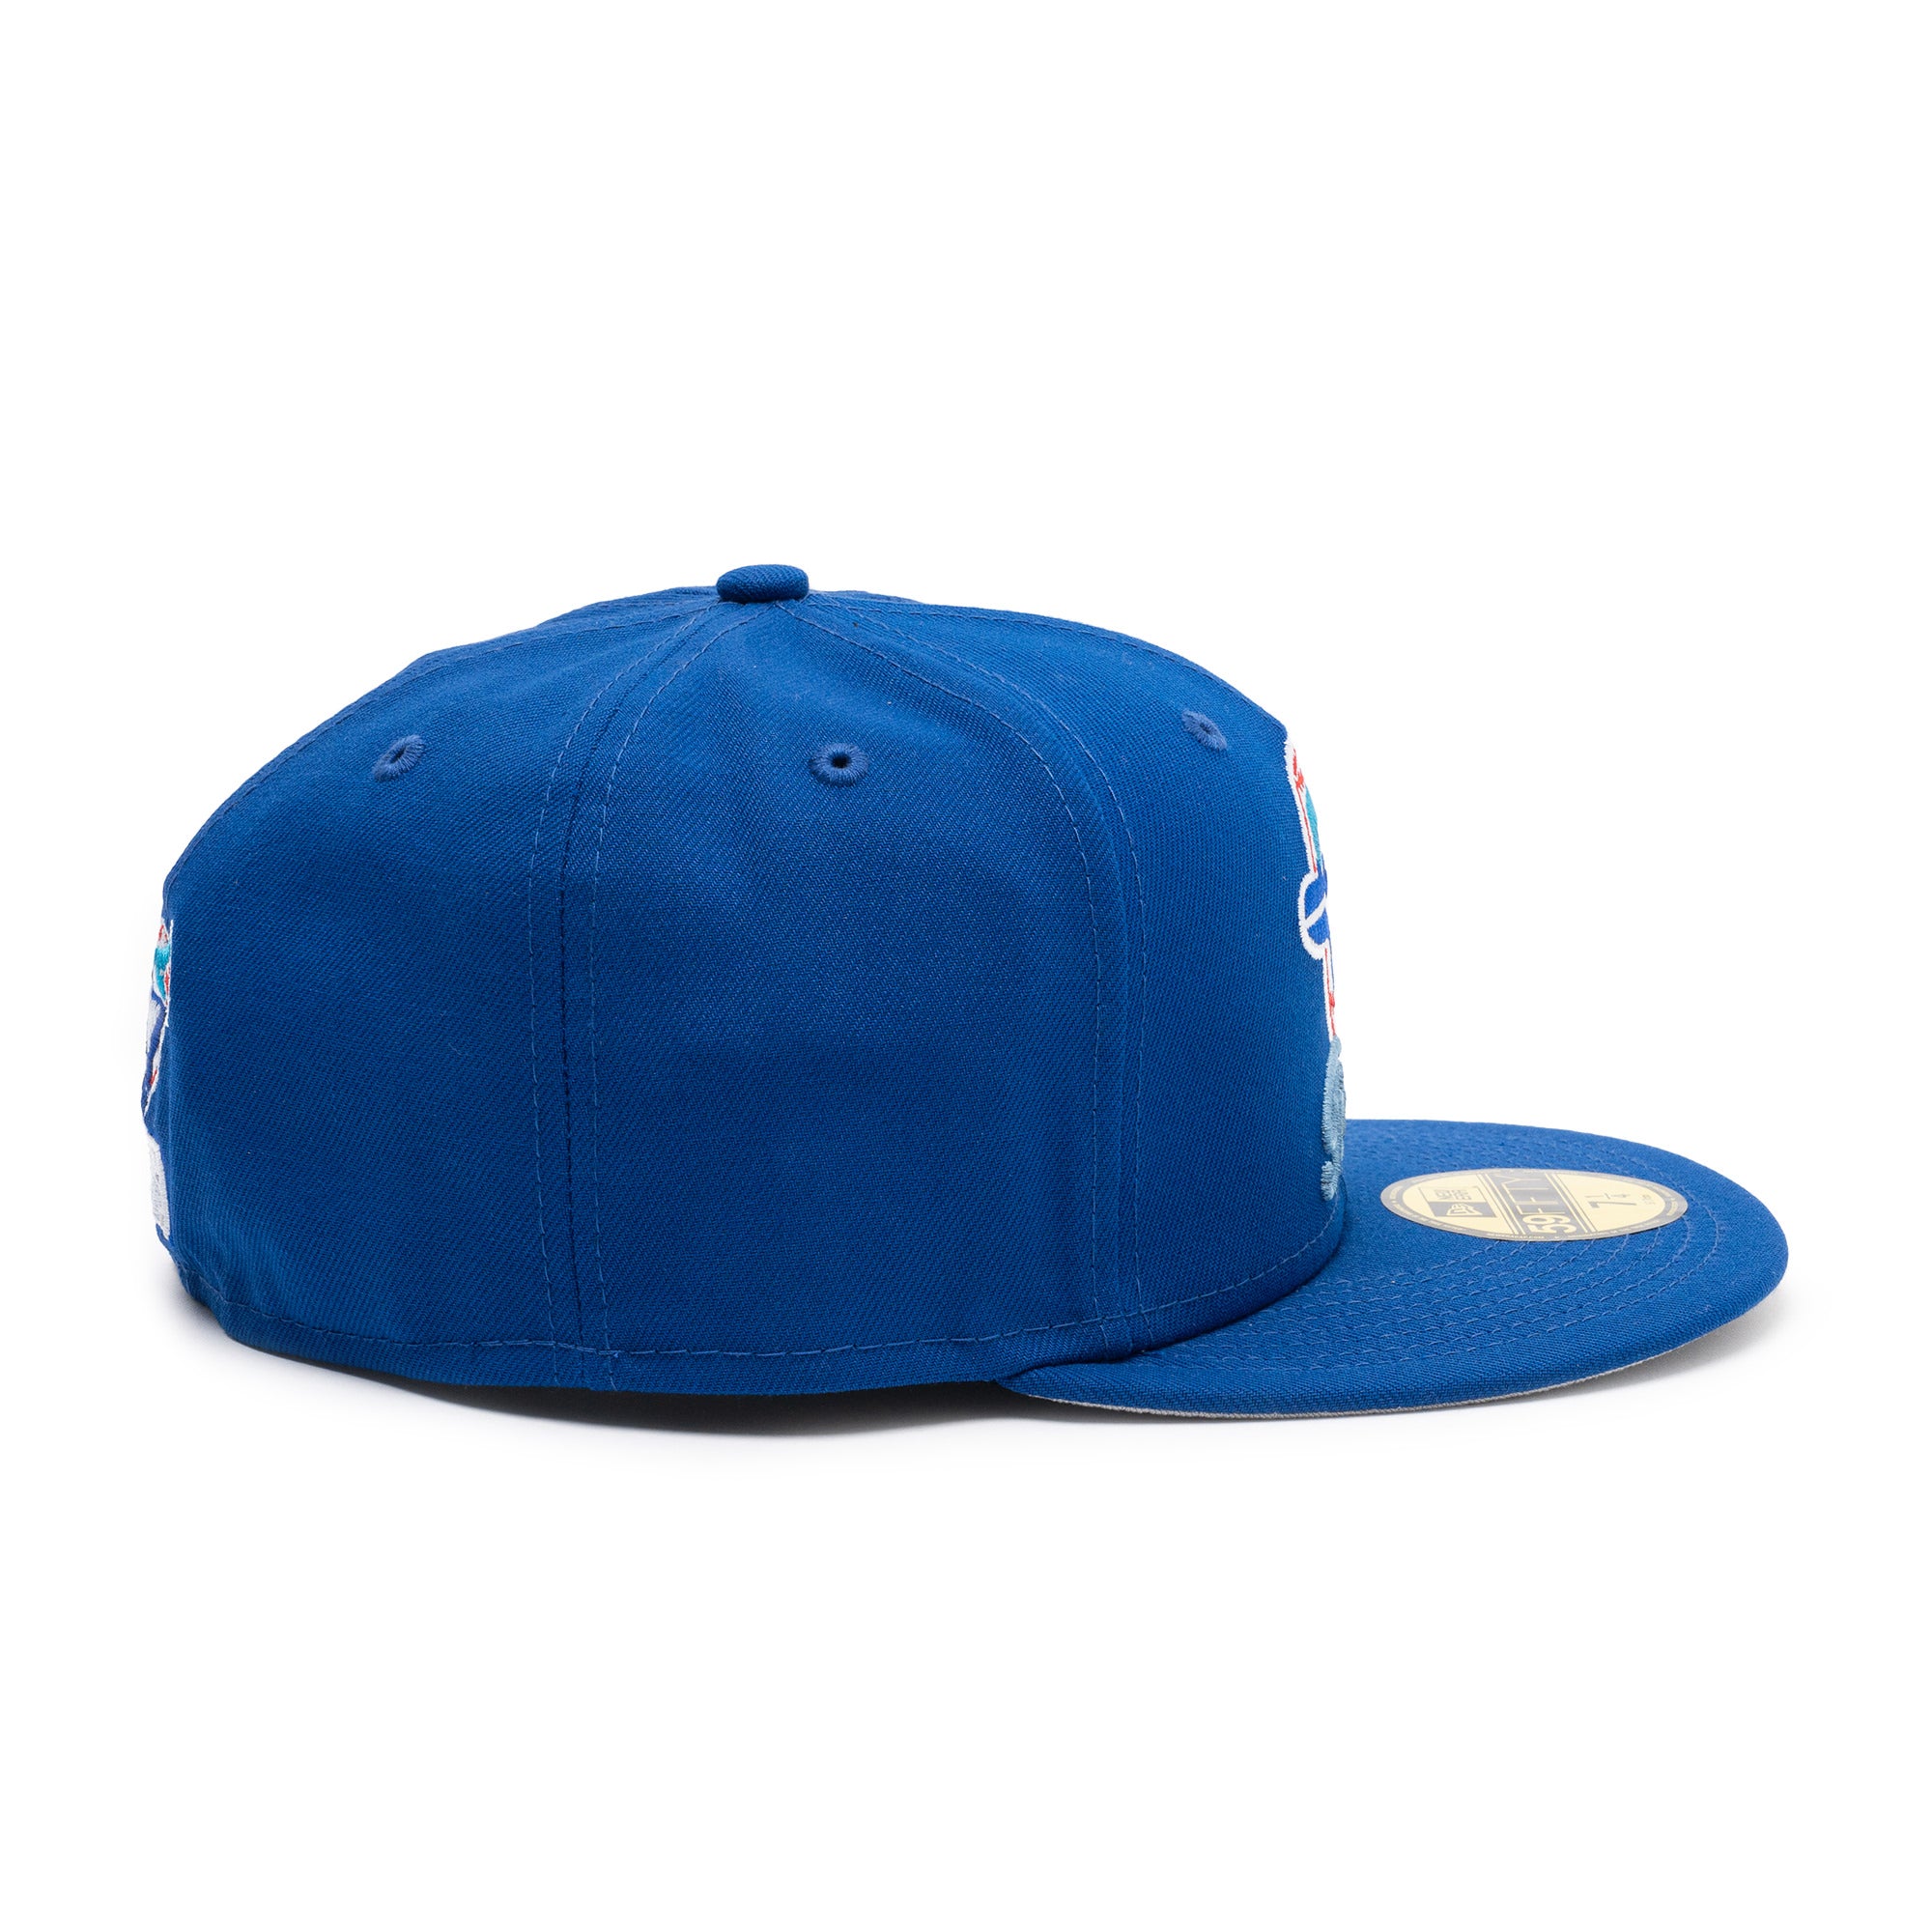 Blue Jays Dual Logo Fitted Blue